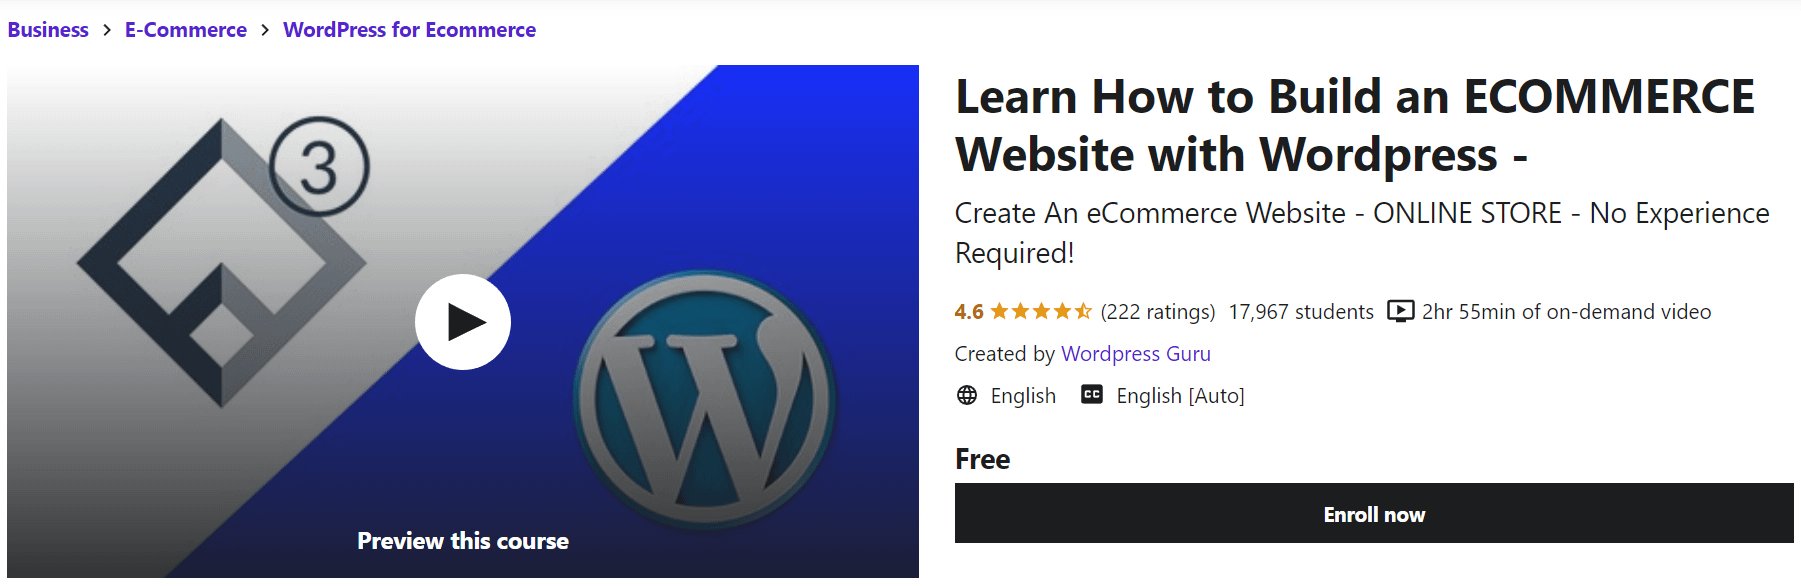 Learn how to build an e-commerce website with WordPress